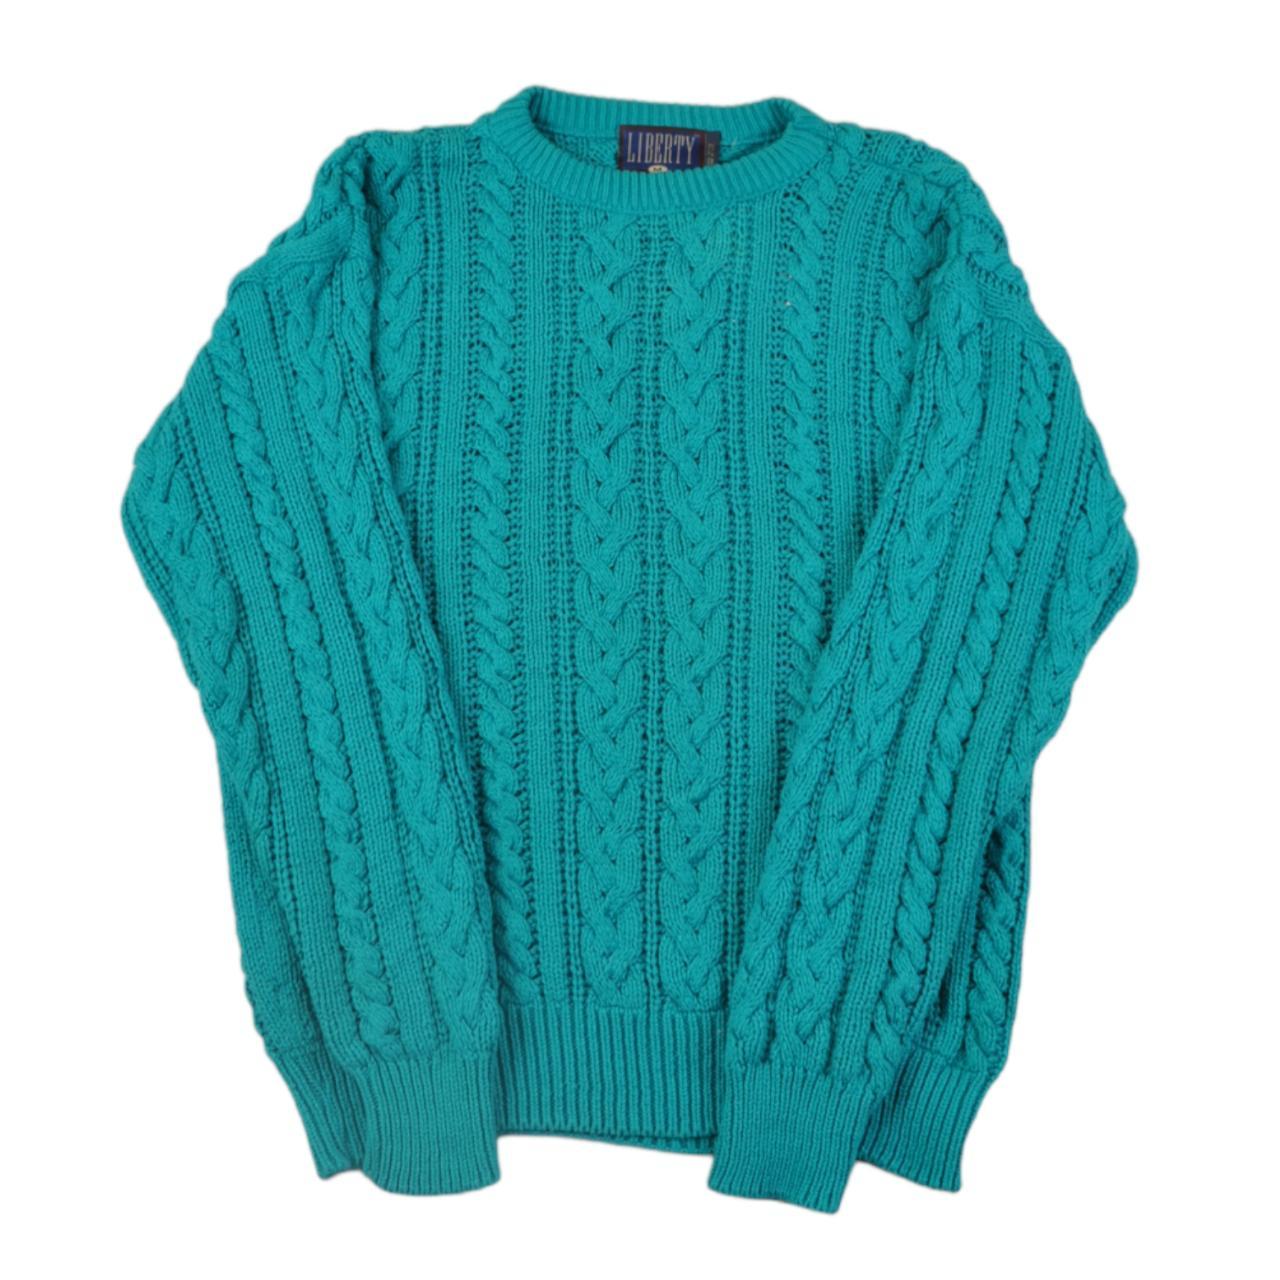 Vintage Cable Knit Knitted Jumper Green Medium Great... - Depop